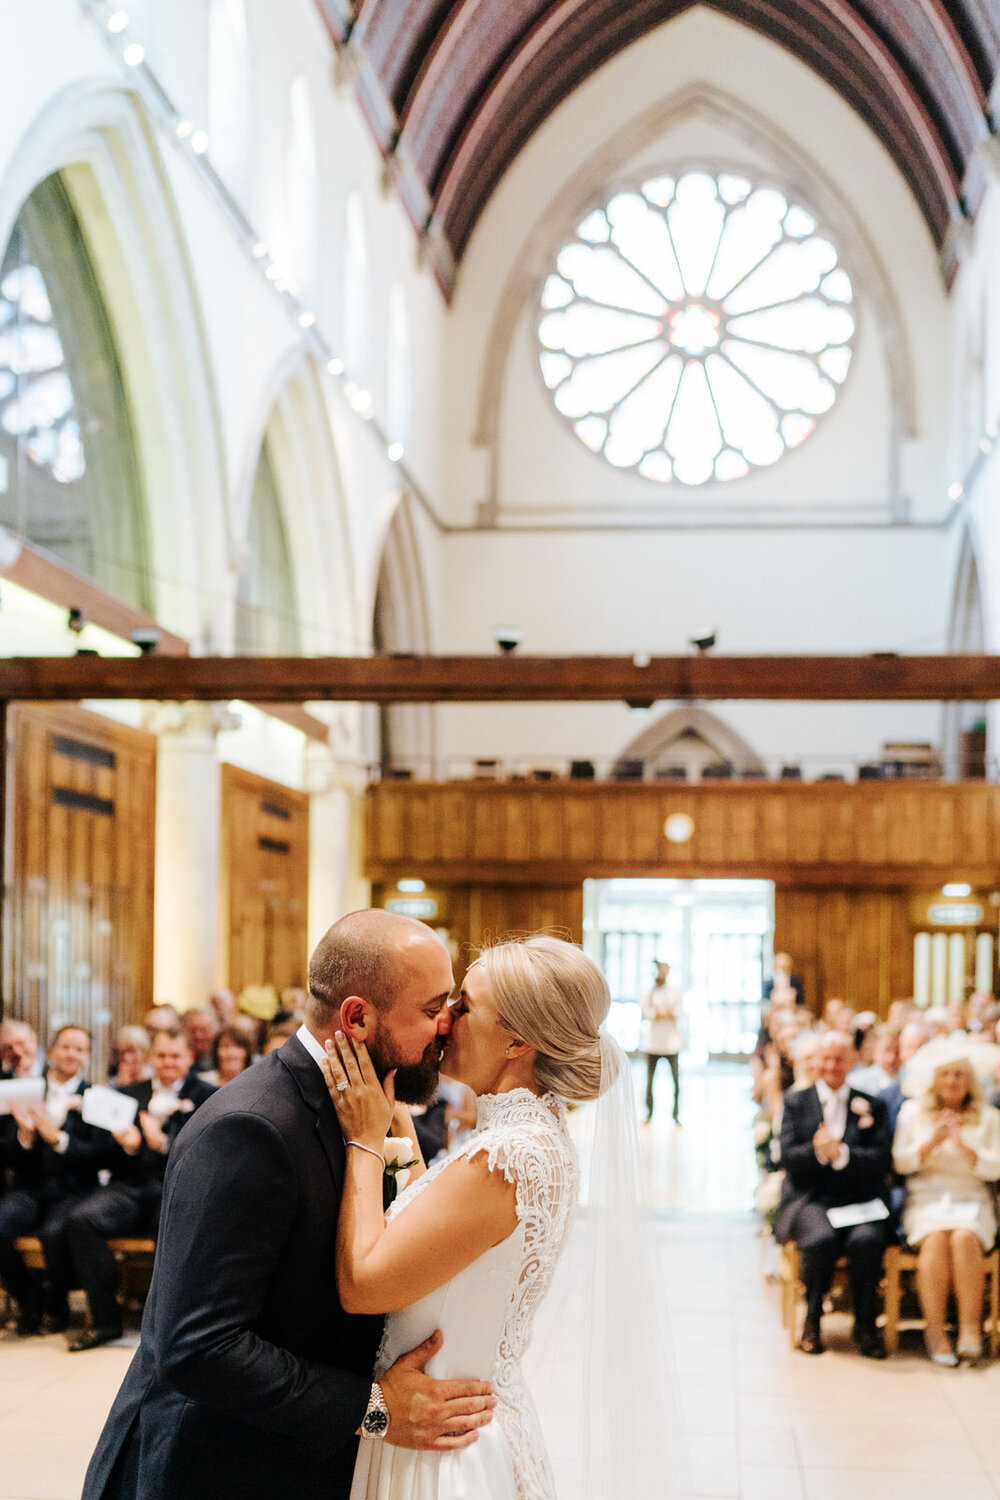 Bride and groom share their first kiss during service at St Matthias Church in Richmond